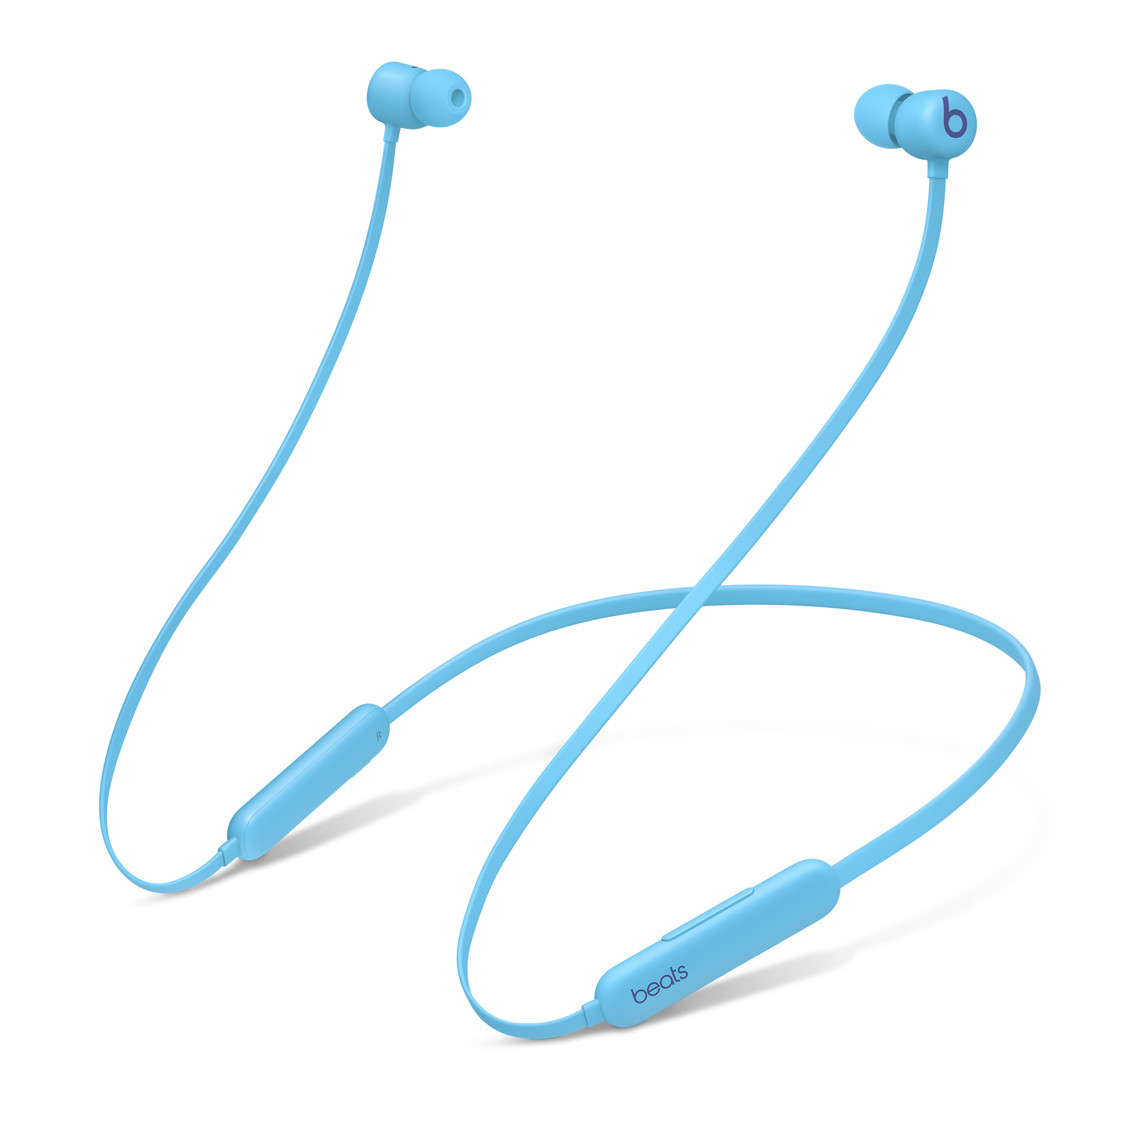 Beats Flex All-Day Wireless Earphones, in Flame Blue, feature a dual-chamber acoustic design to achieve outstanding stereo separation with rich and precise bass.